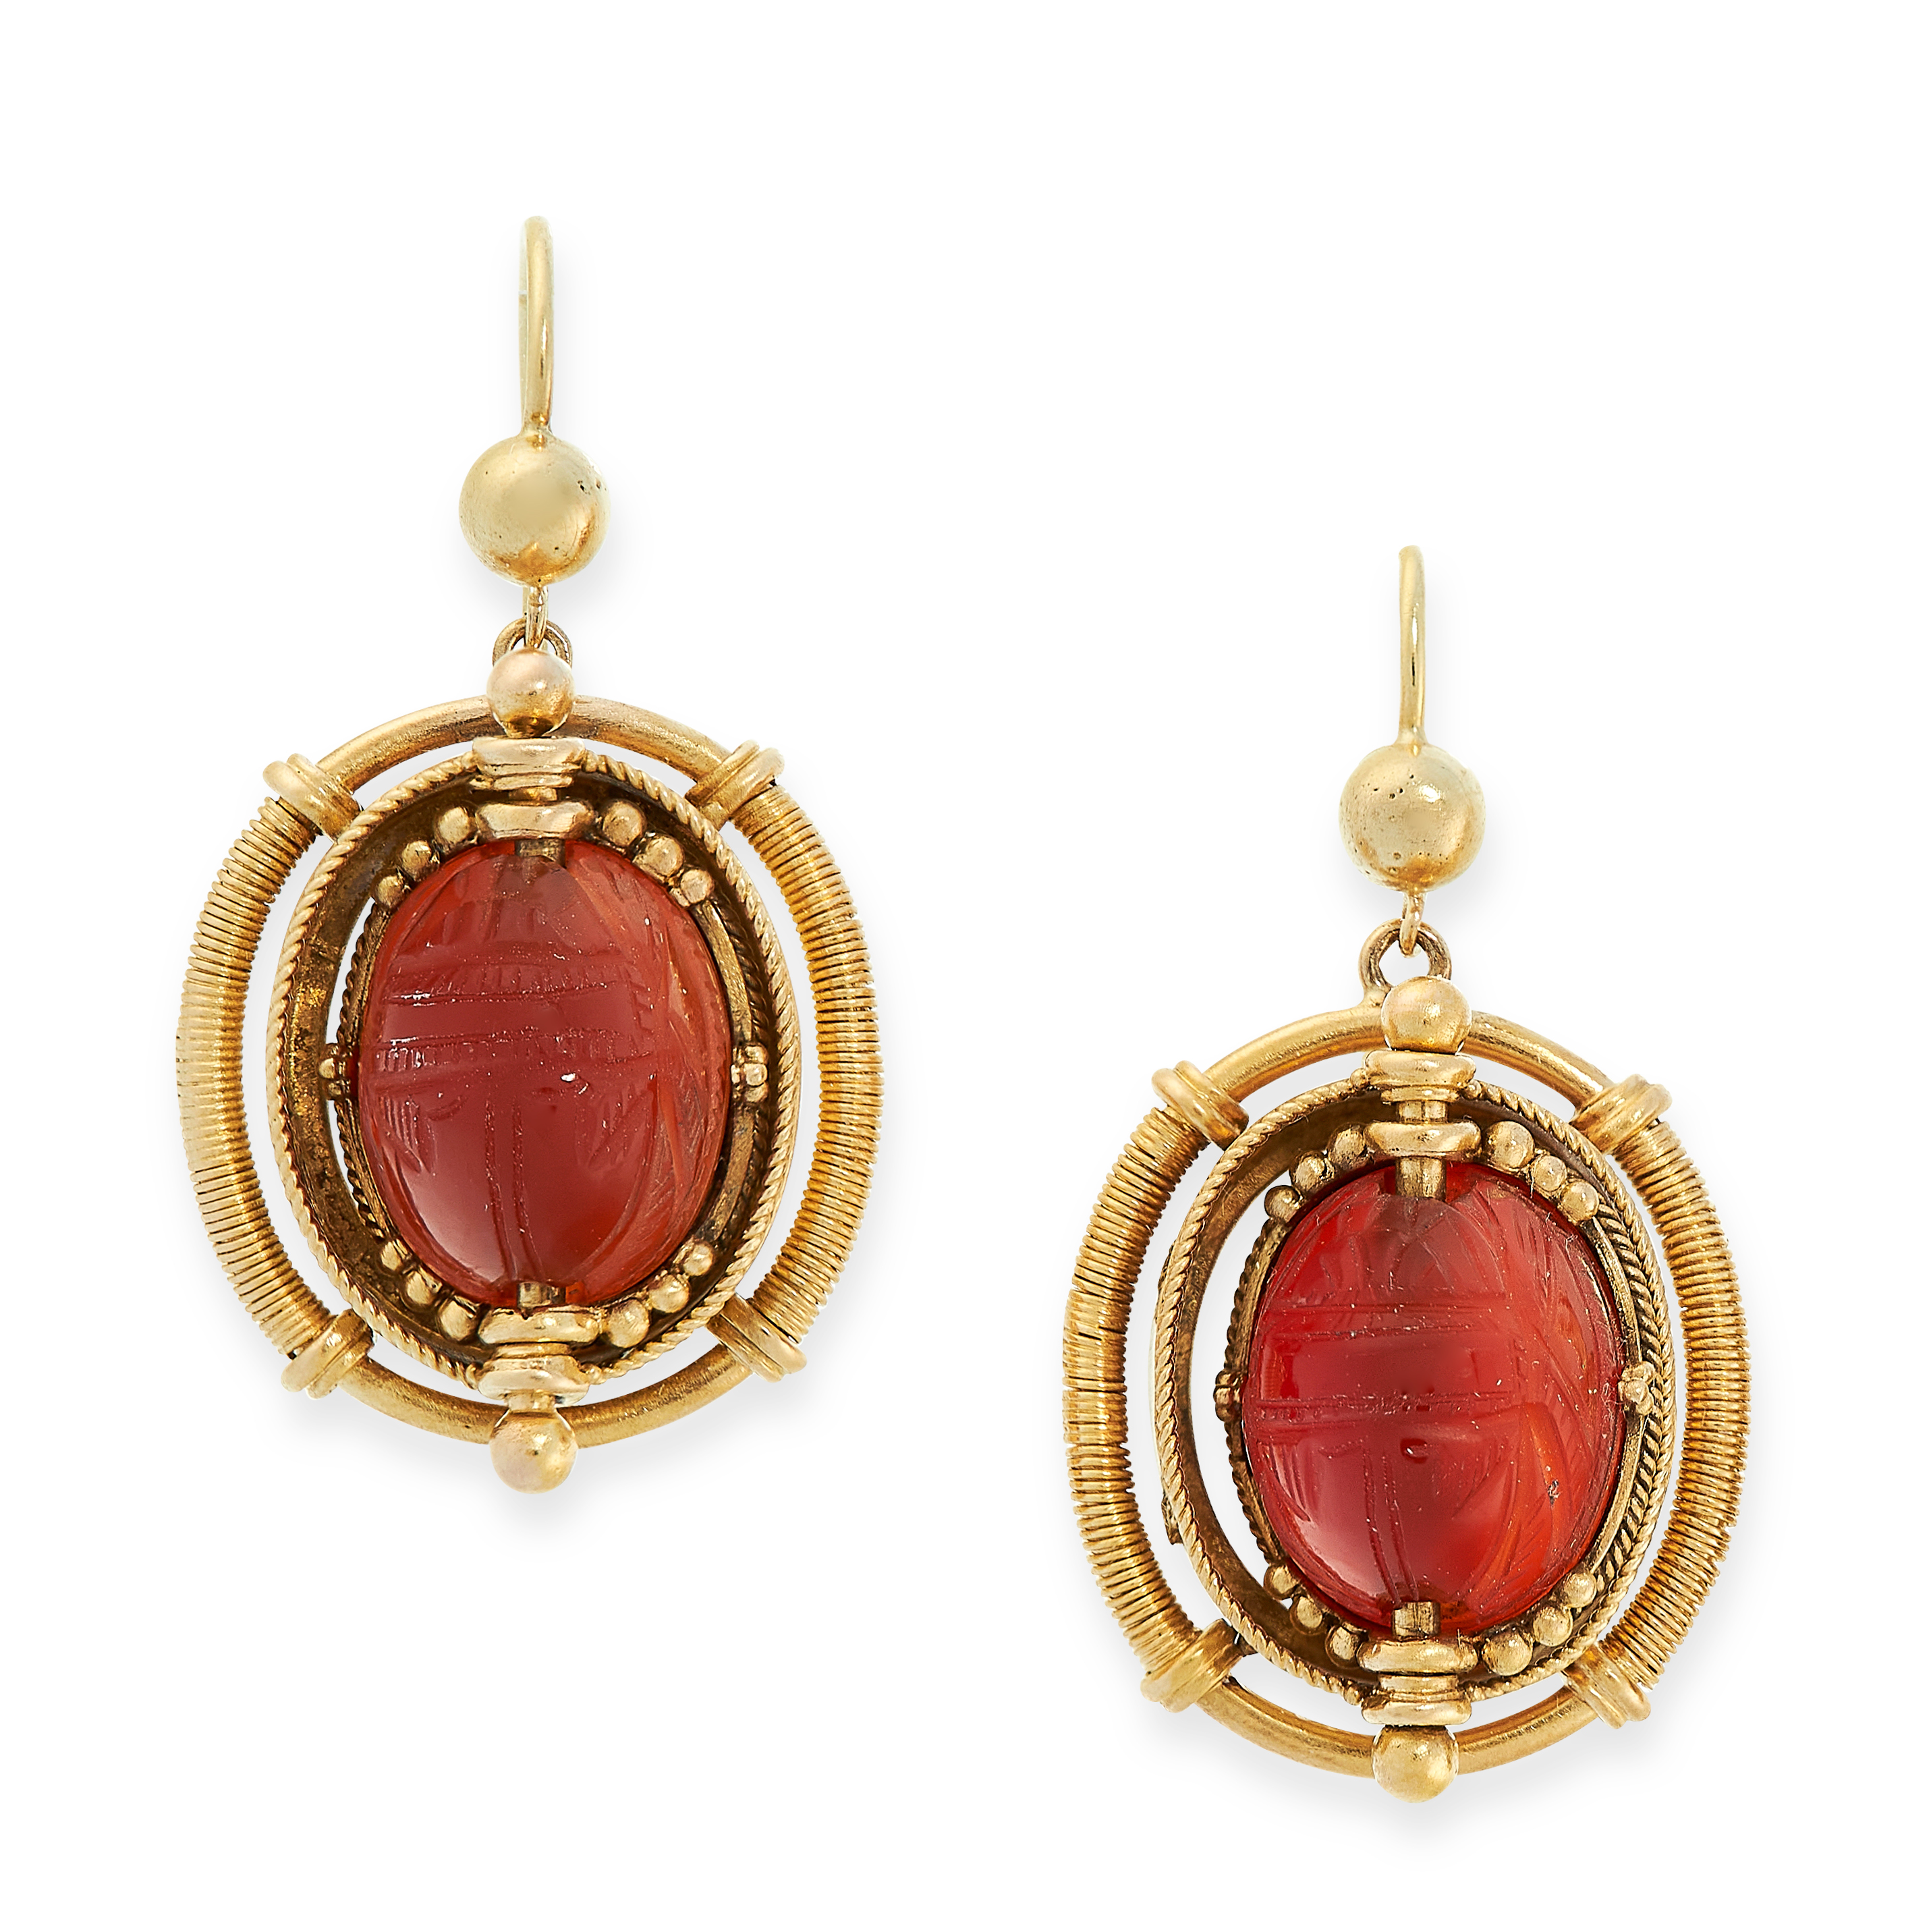 ANTIQUE CARNELIAN SCARAB BEETLE EARRINGS, 19TH CENTURY in yellow gold, in the manner of